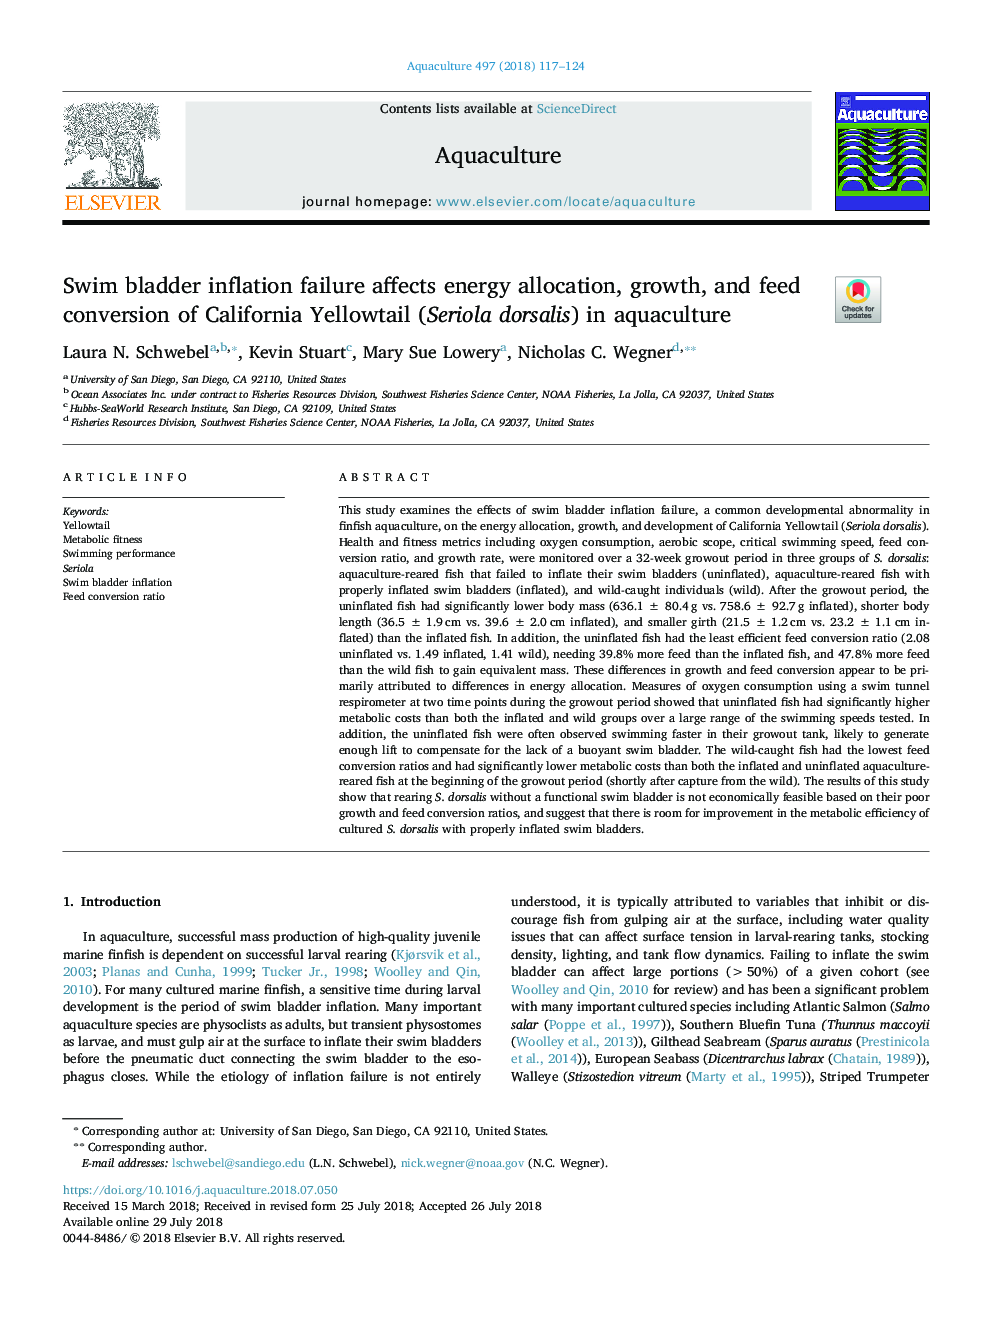 Swim bladder inflation failure affects energy allocation, growth, and feed conversion of California Yellowtail (Seriola dorsalis) in aquaculture